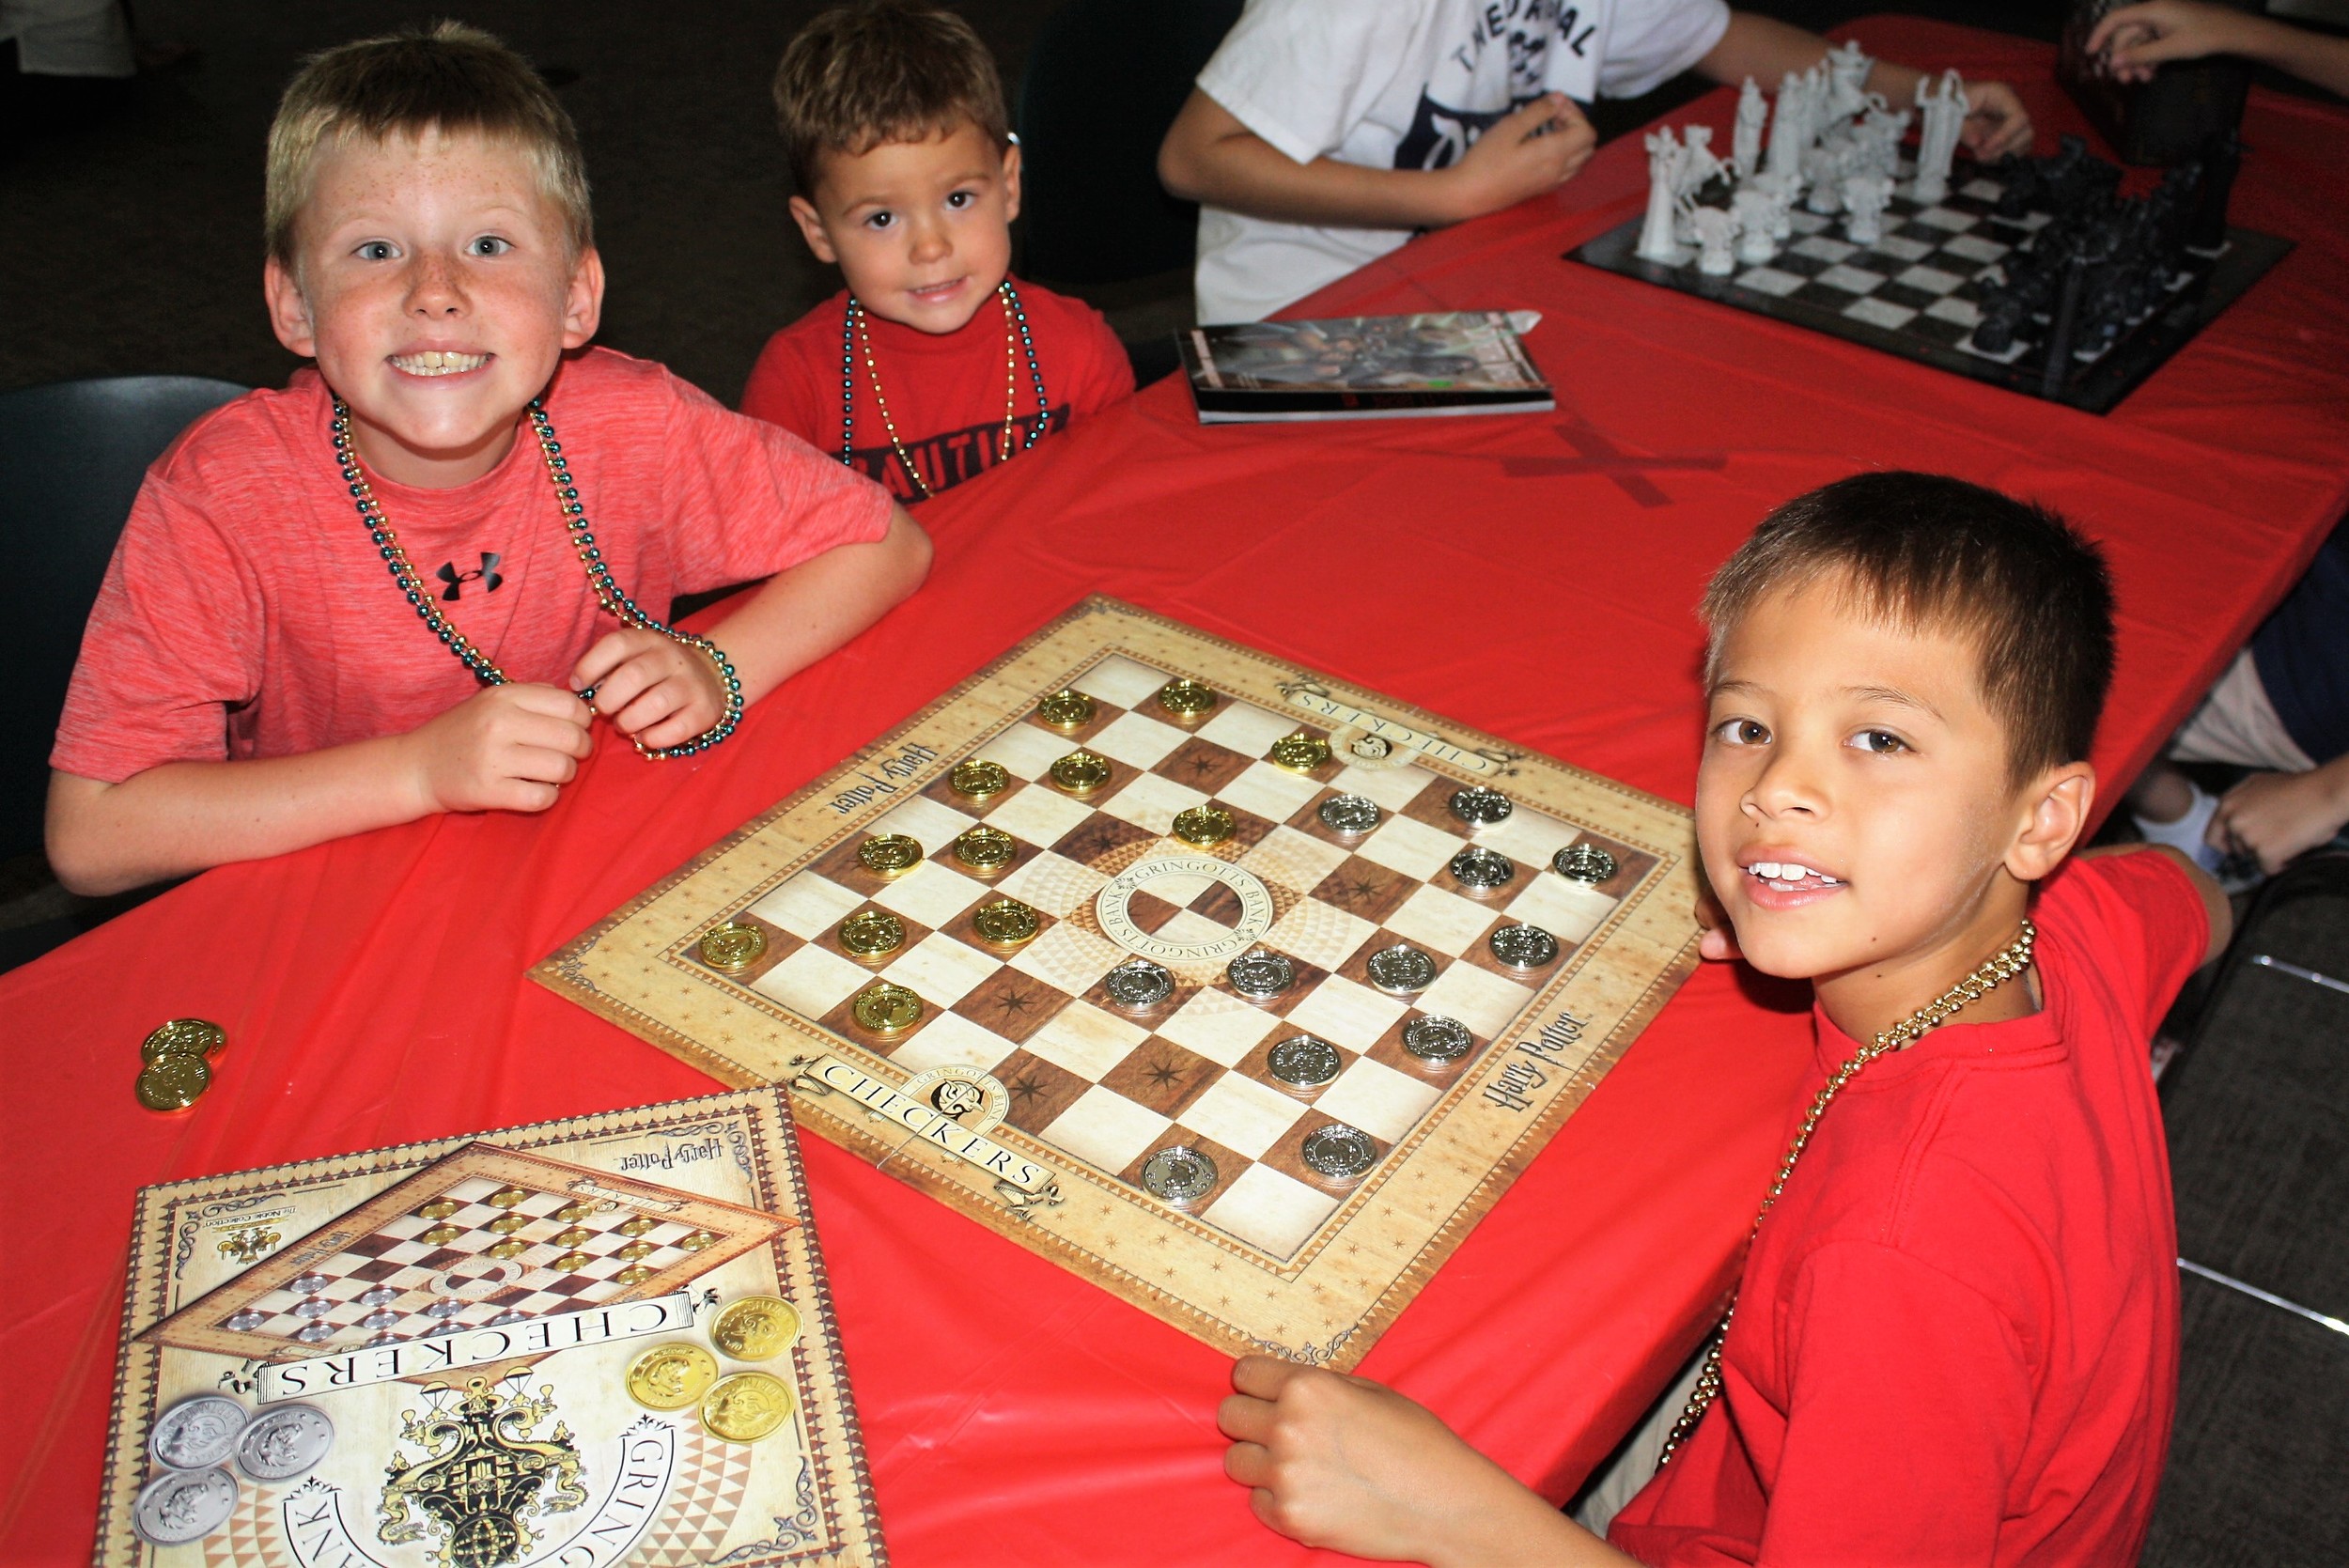 Local children play Gringotts Checkers at the library event.